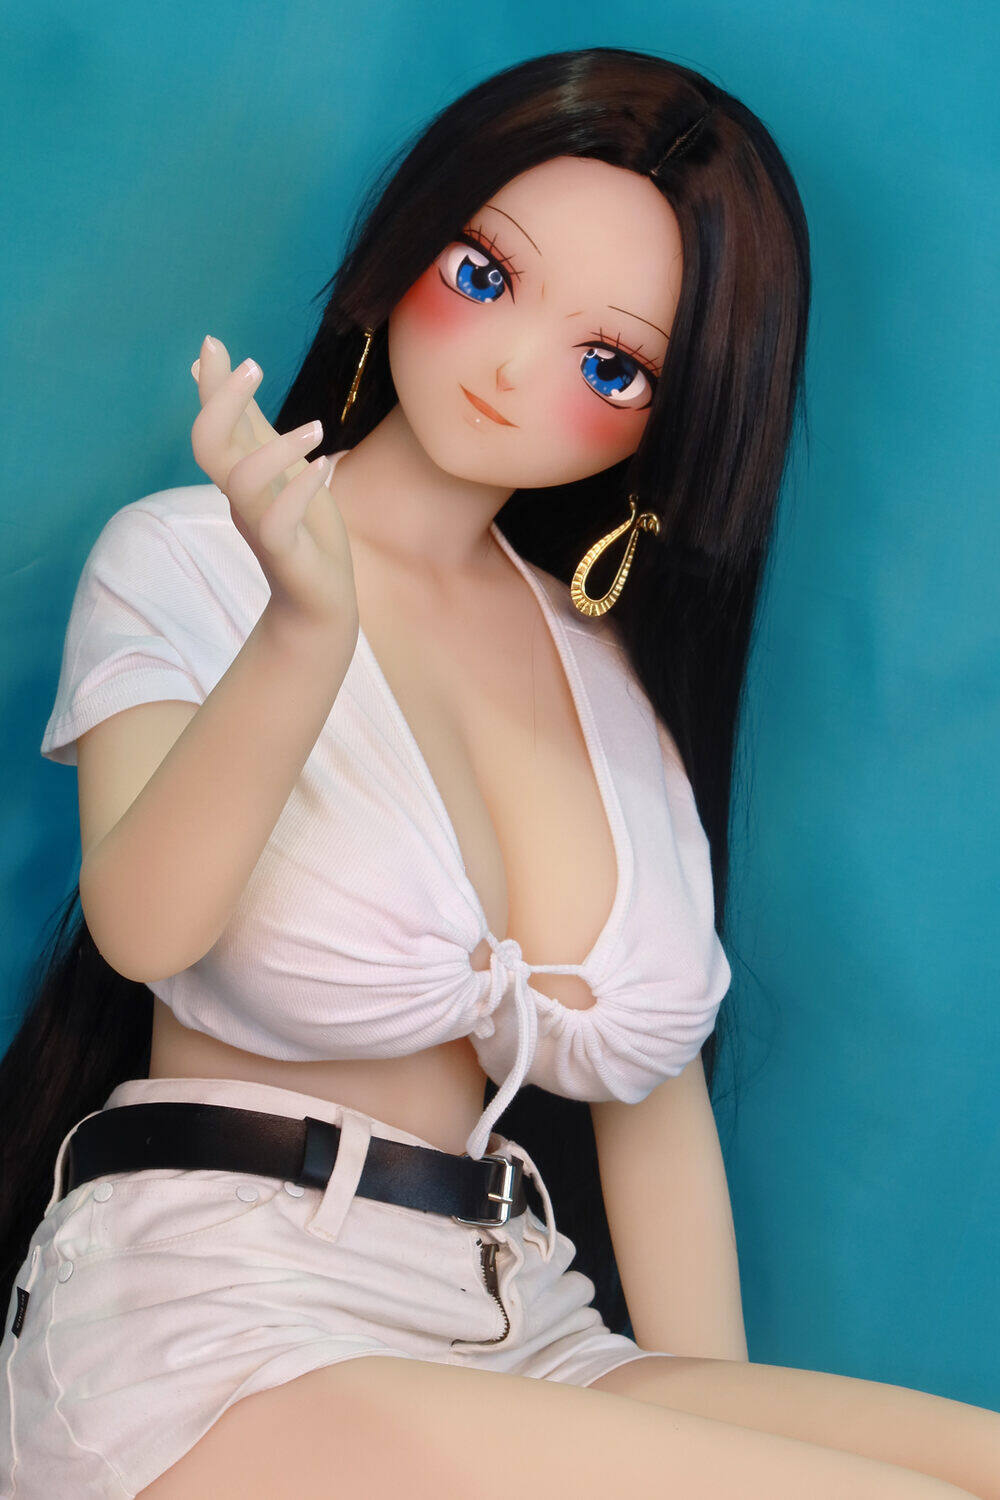 Justice-155cm(5ft1) Aotume Adult Doll H-Cup Normal Skin Tone Big Boobs TPE Dolls image10